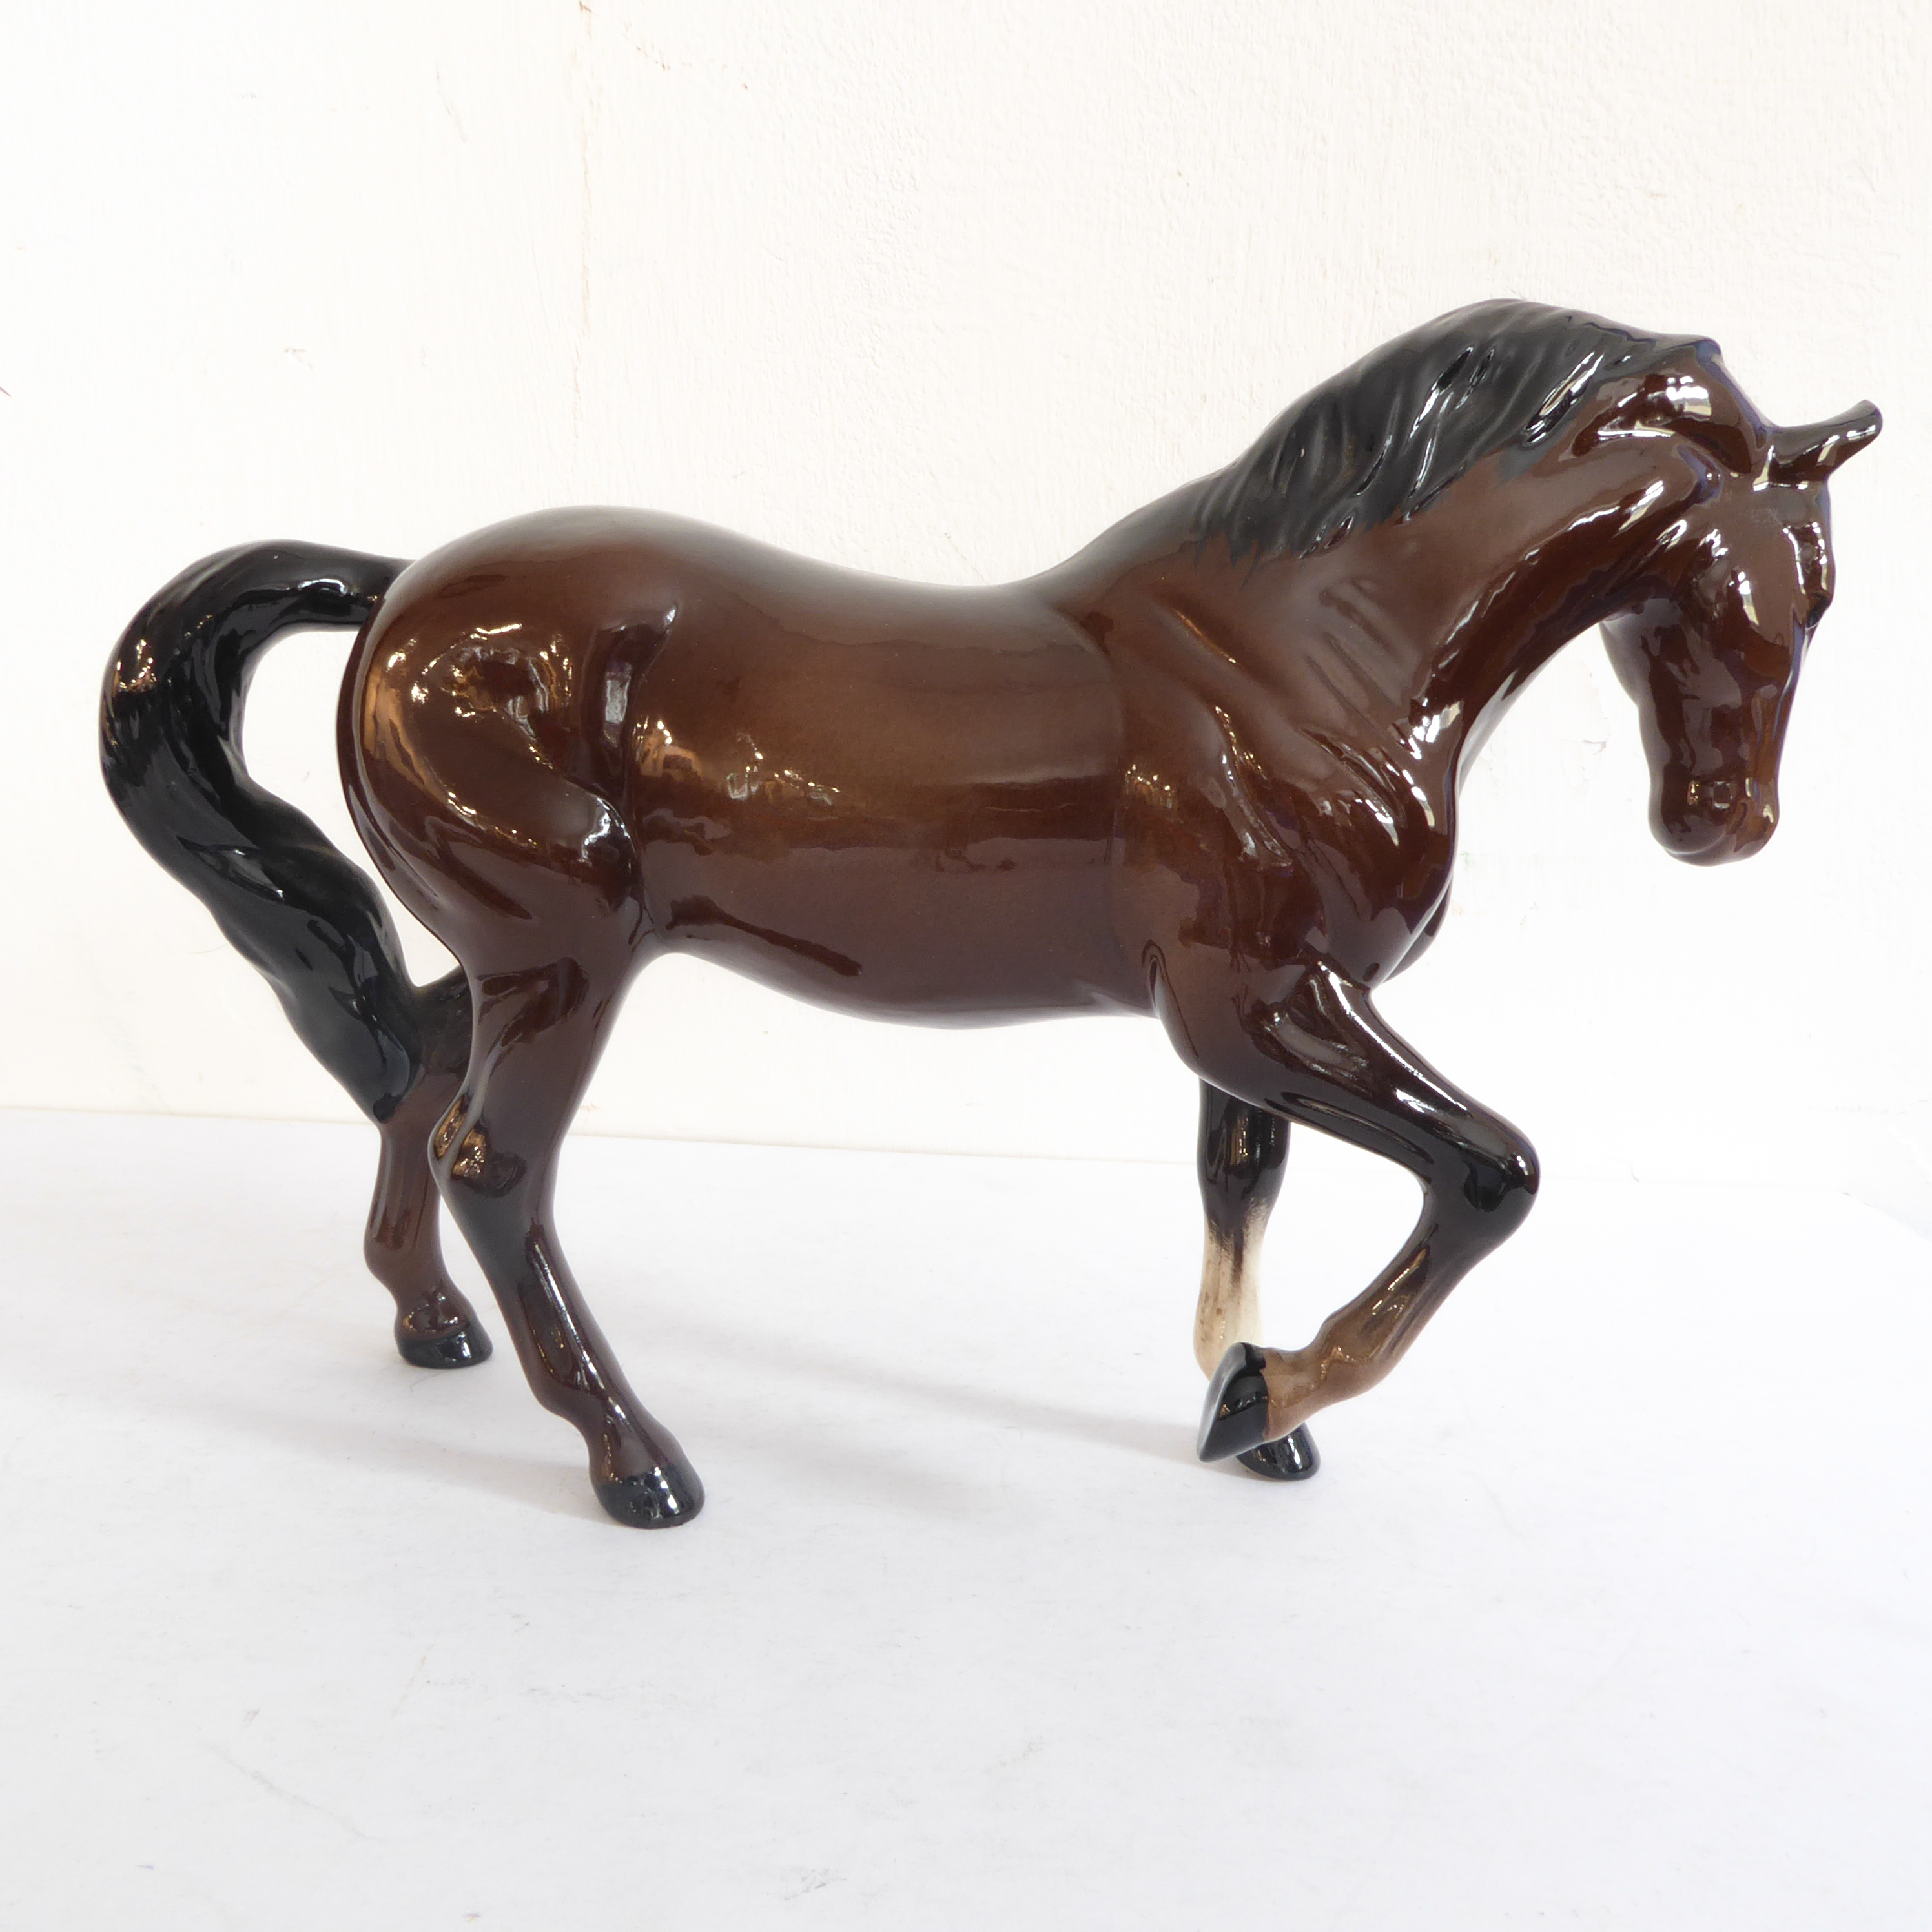 A Royal Doulton horse figurine, 'Stocky Jogging Mare' (1969-1979) (15cm high) - Image 4 of 4